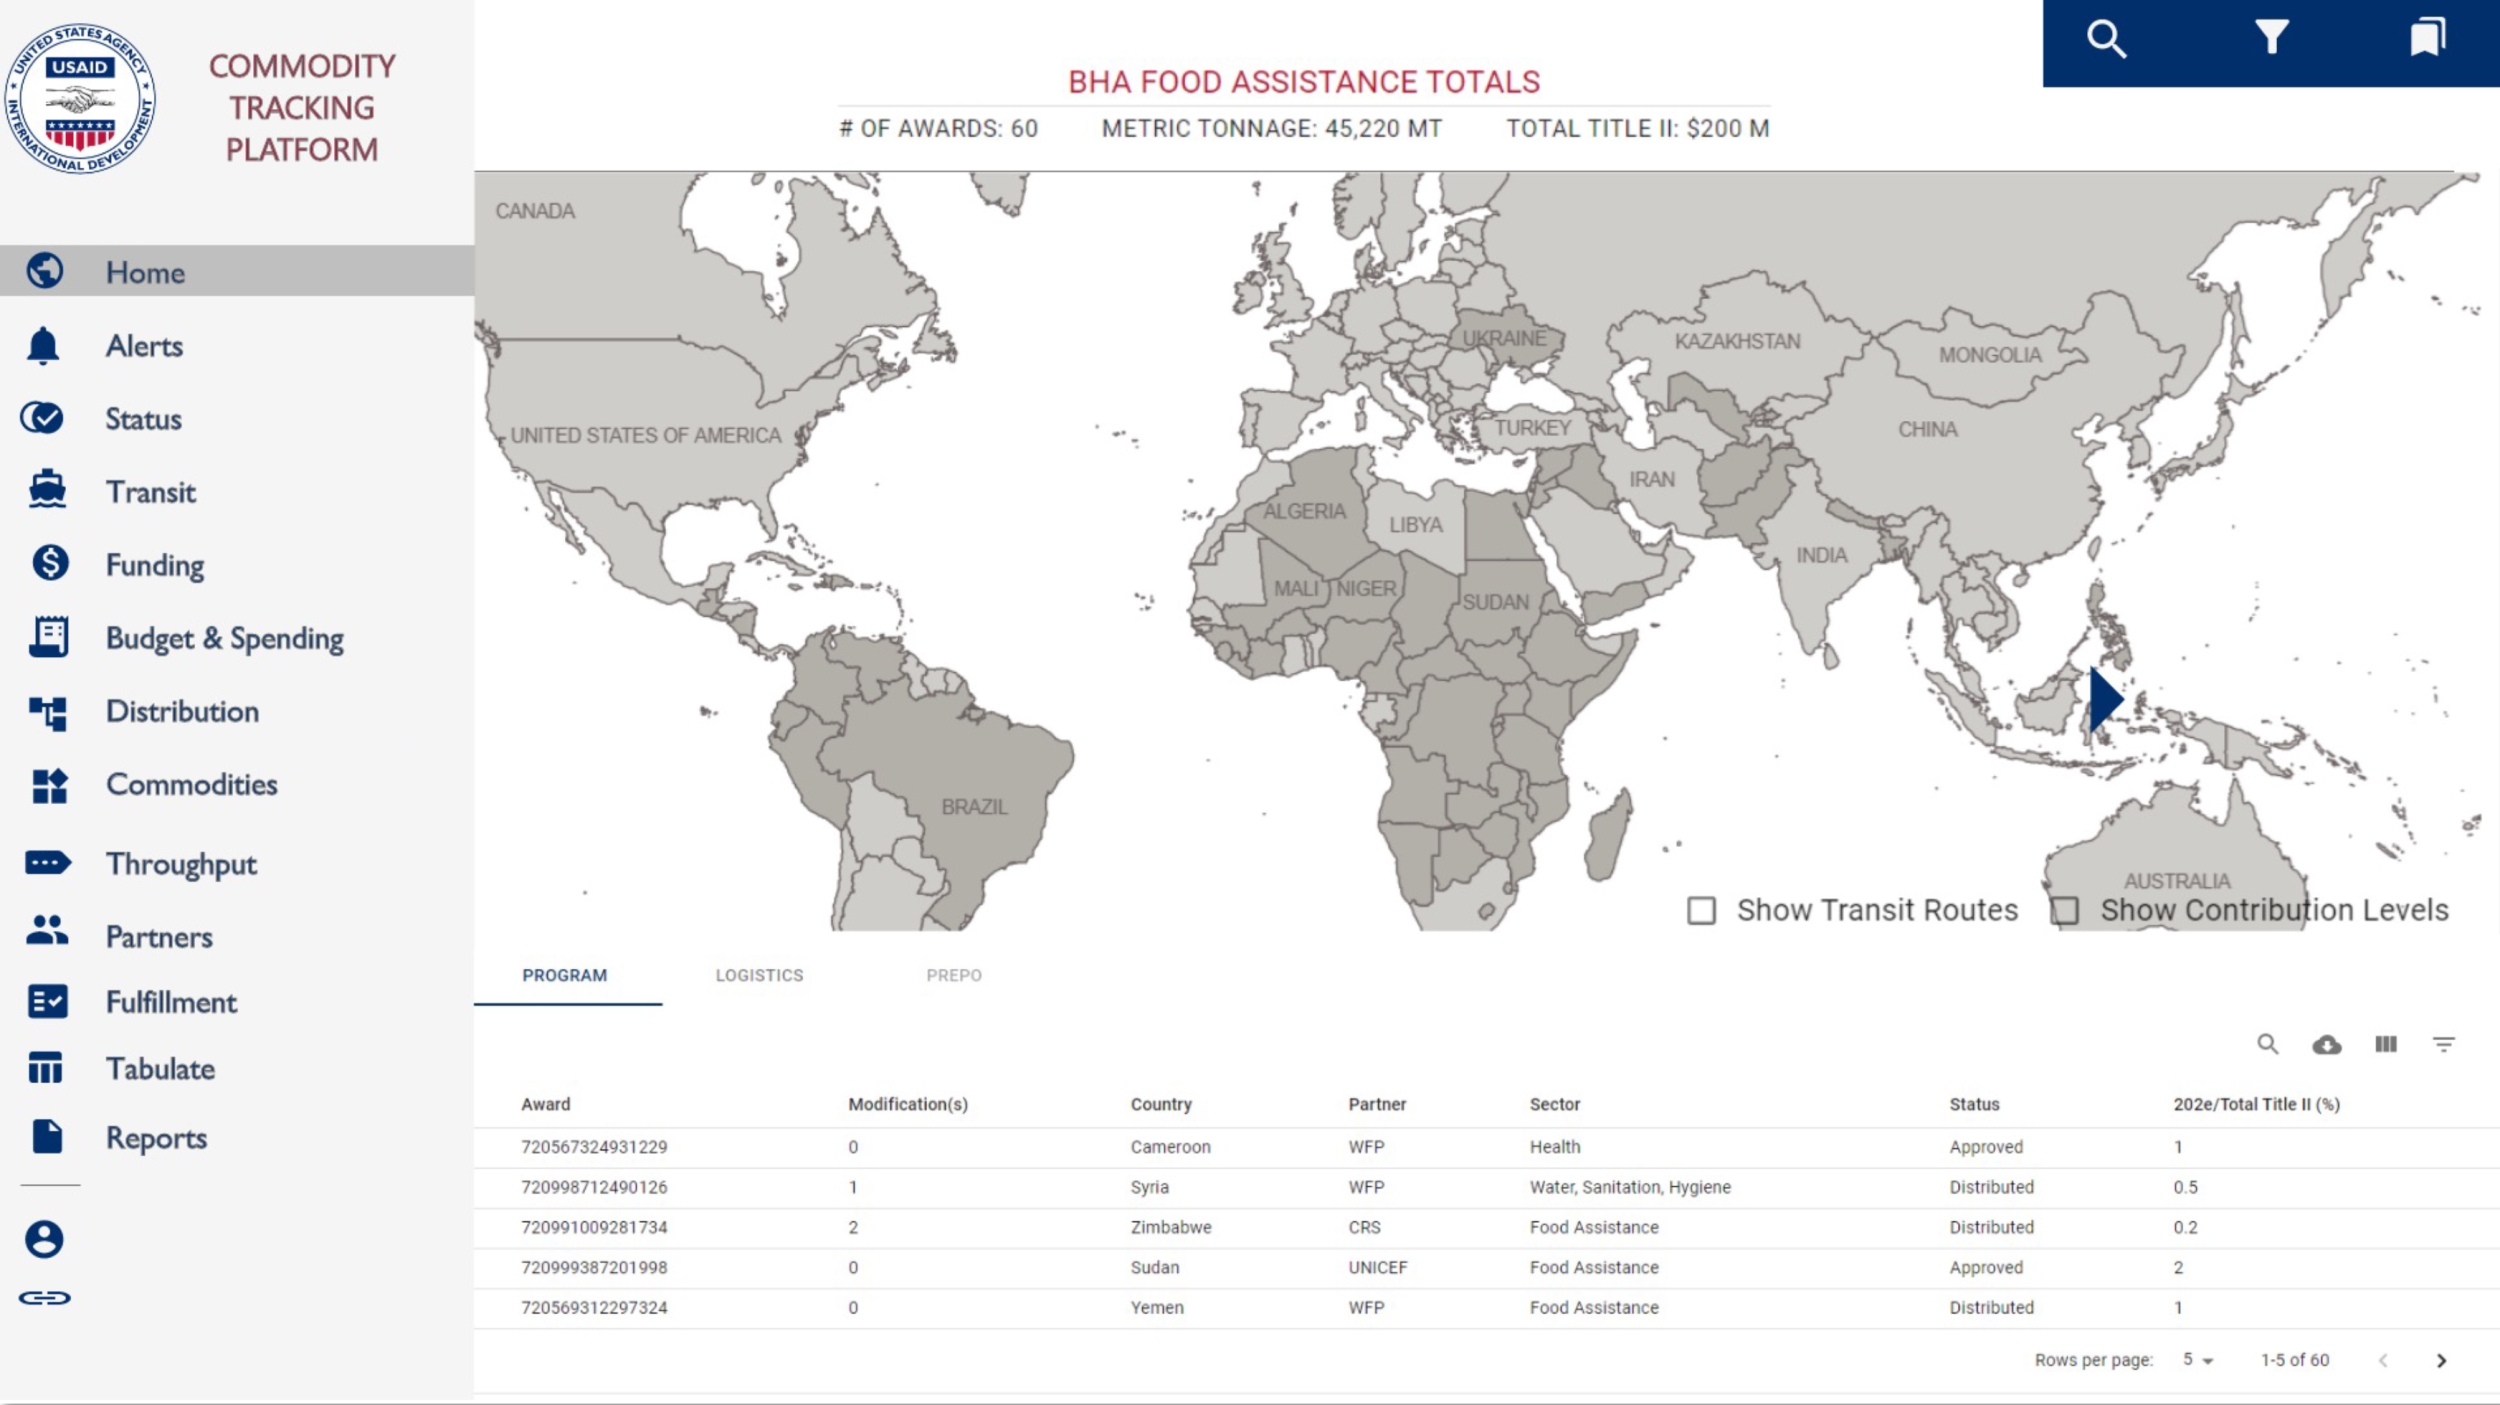 A commodity tracking platform screenshot shows food assistance totals for different countries. On the left panel, users can click features like "Alerts," "Distribution," and "Partners."